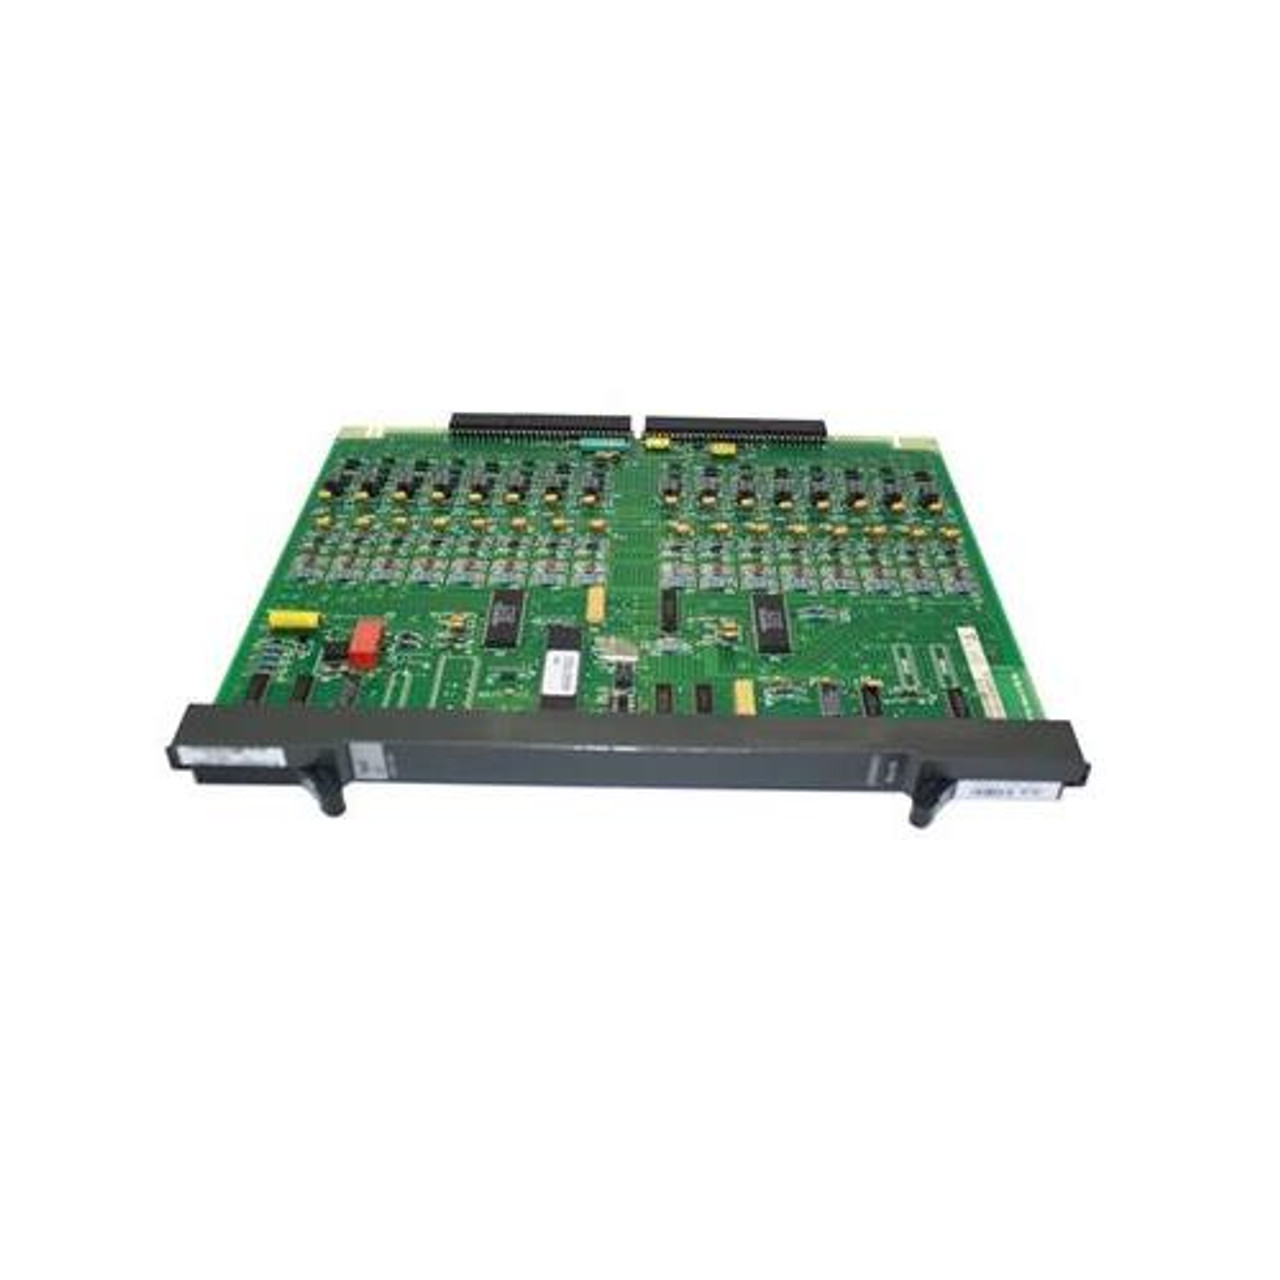 NTNQ16AA Nortel Frame Relay Complete Product 1 Processor, 8 Port Network Connectivity/Management (Refurbished)